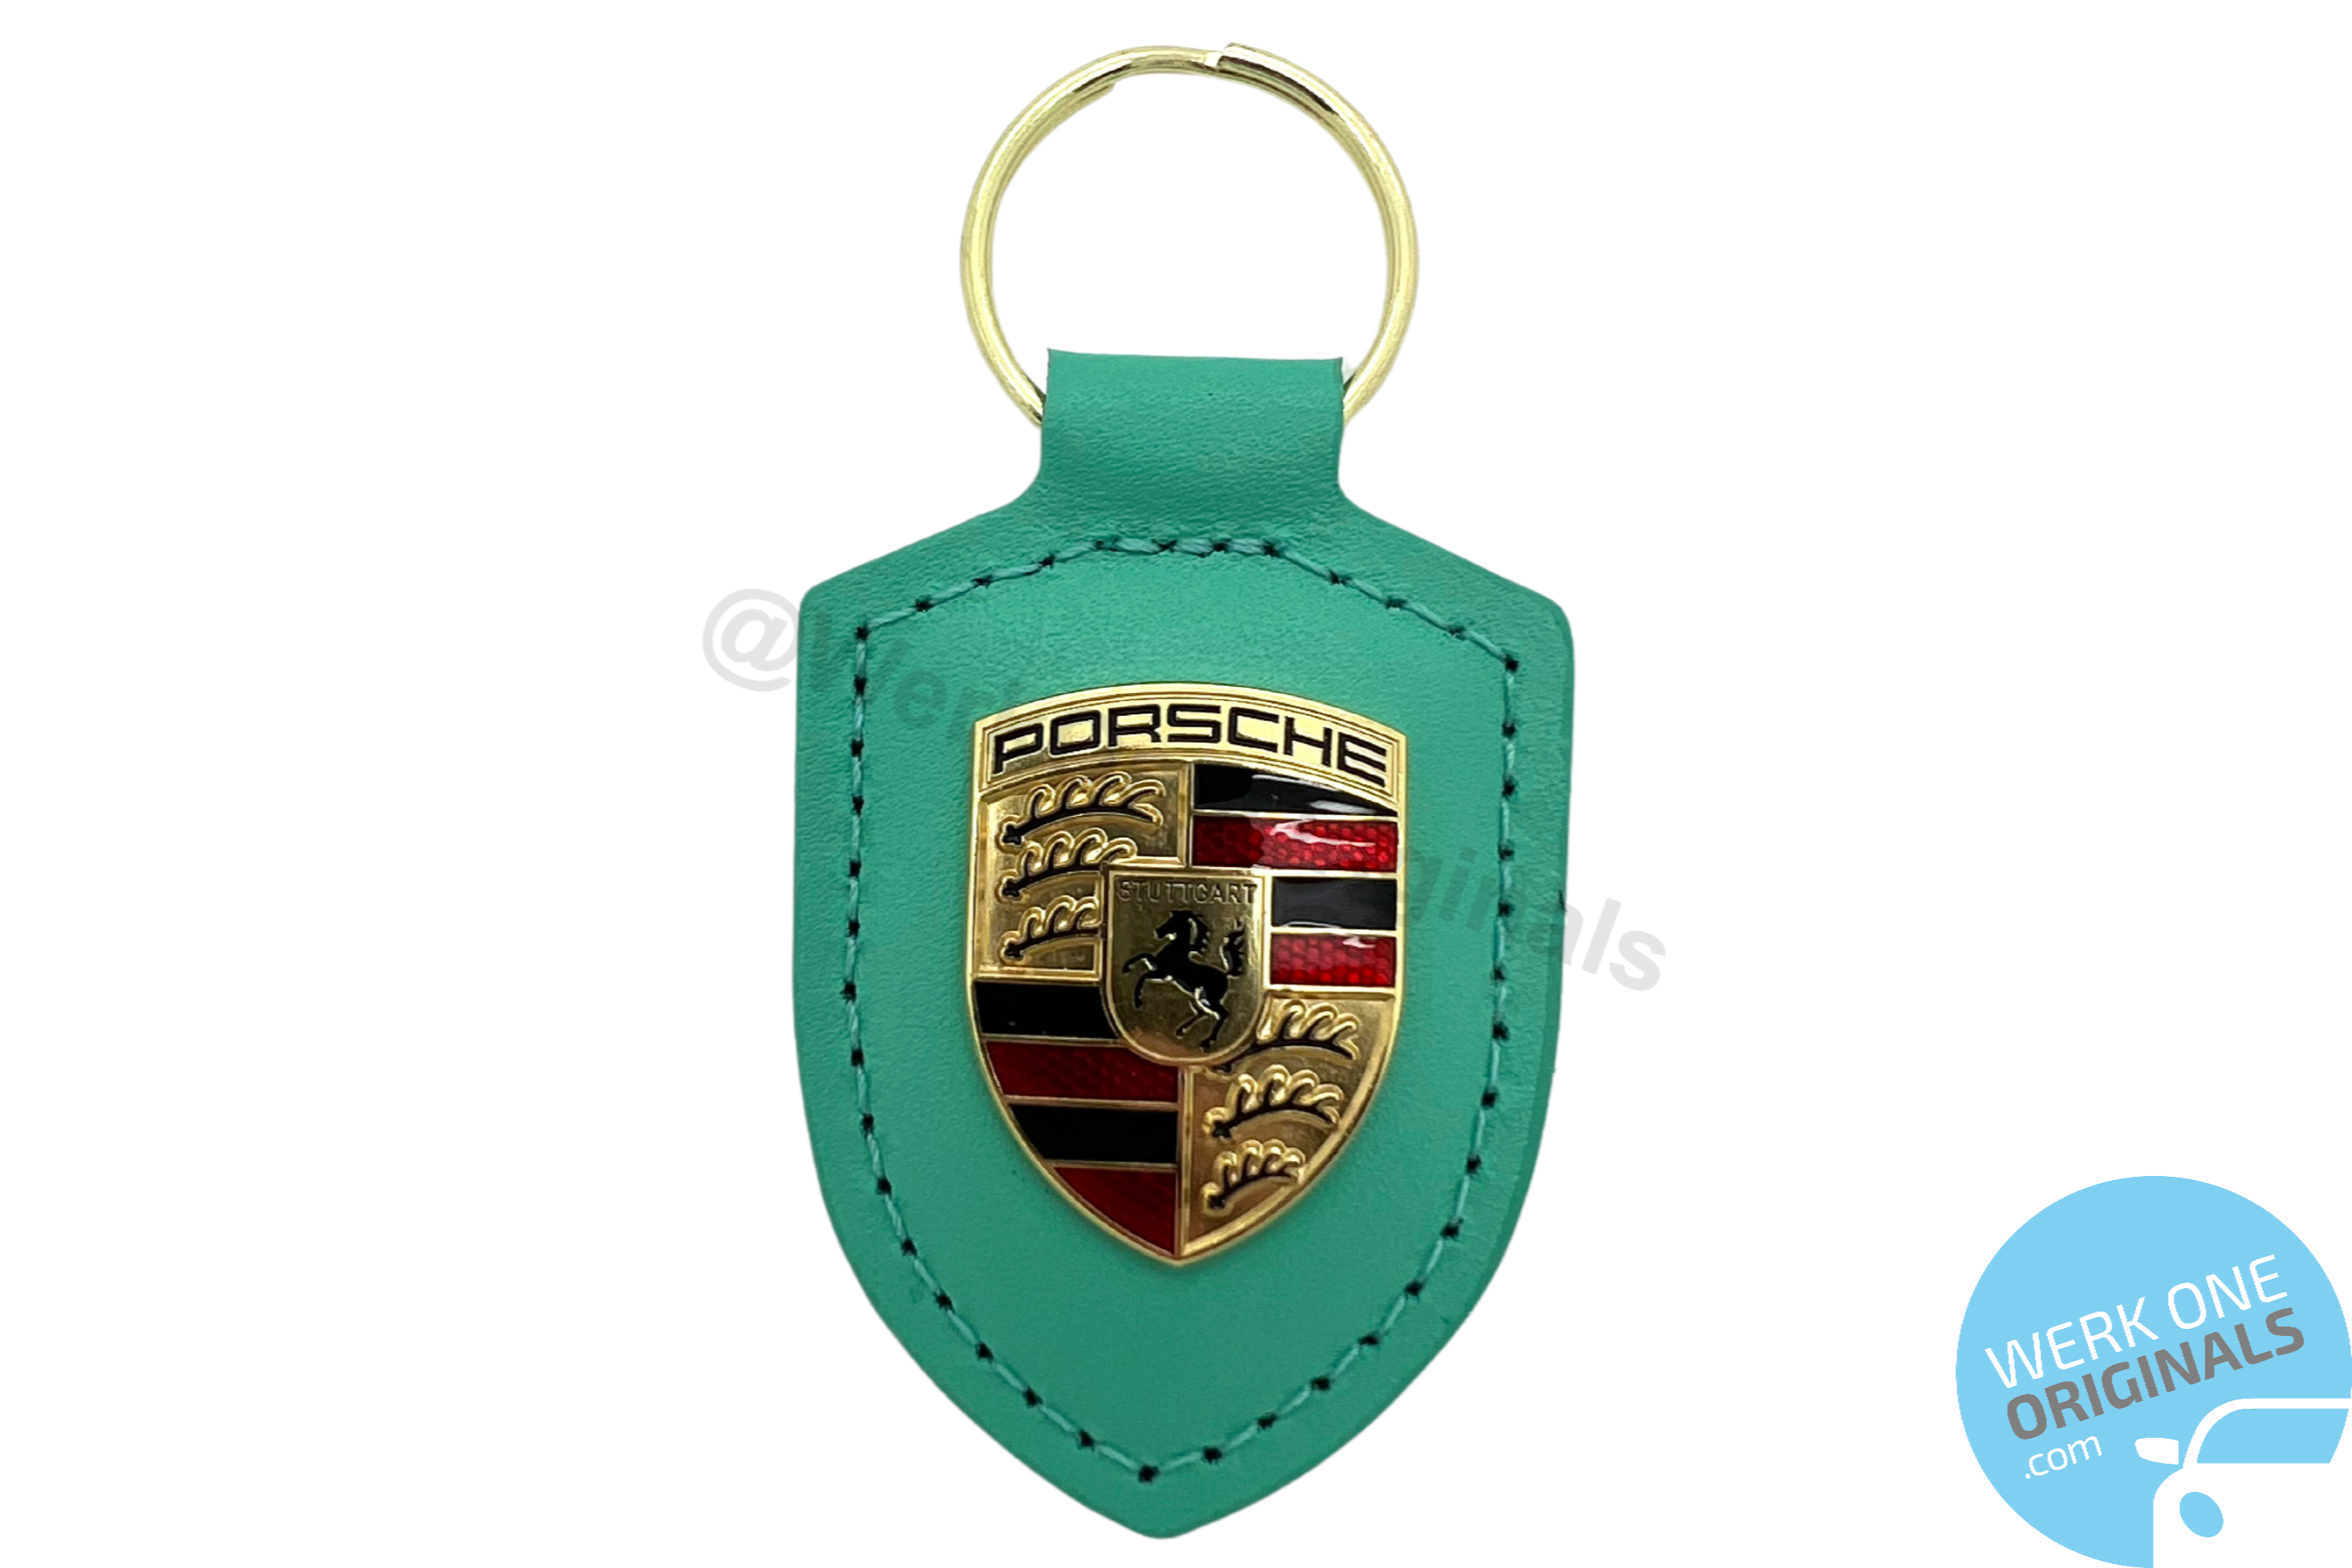 Porsche Official 75 Years Anniversary Limited Edition Key Fob in Mint Green